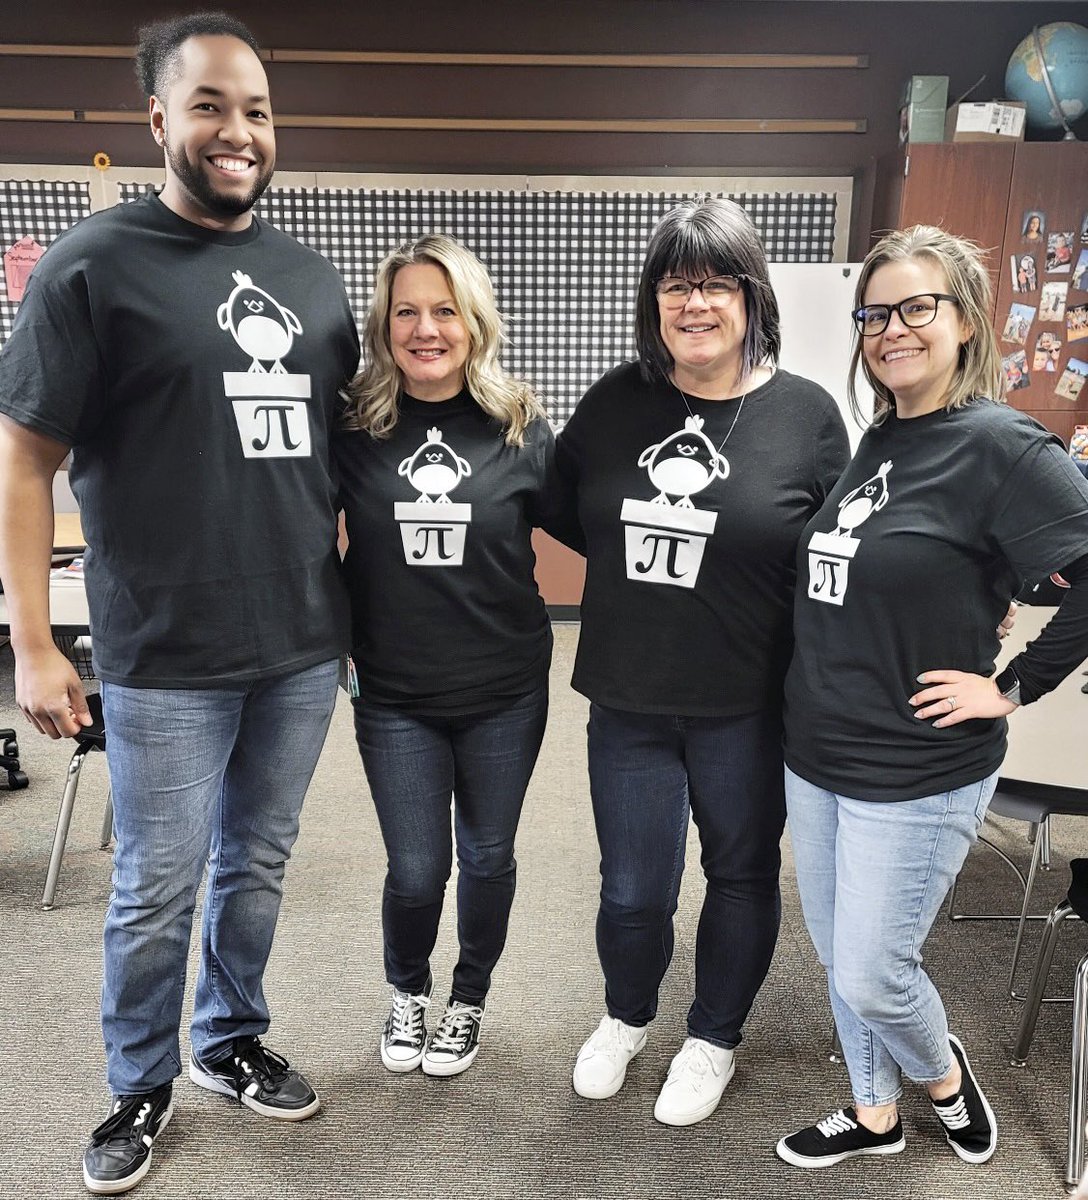 NOW THAT’S FUNNY! 😀 Check out the “Chicken Pot Pi” shirts some of our  @ShaullSharks staff were spotted wearing today. Happy Pi Day, CV!

📸 courtesy Ms. Ellen Kemprowski.